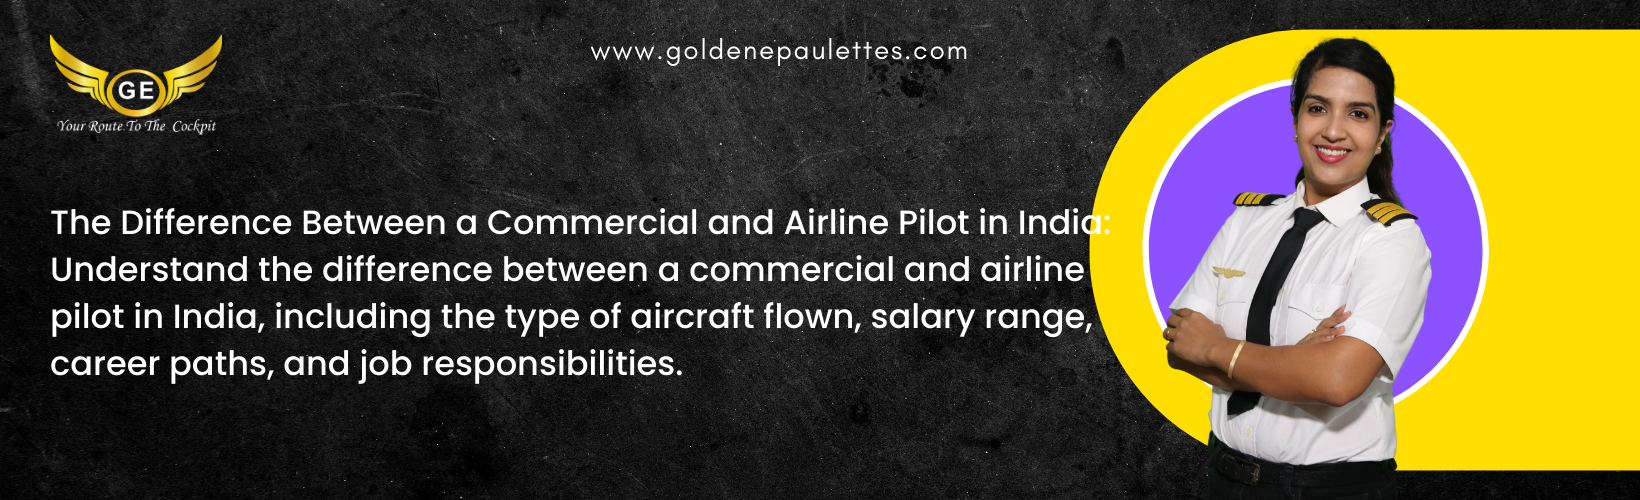 What is the Difference Between a Commercial and an Airline Pilot in India